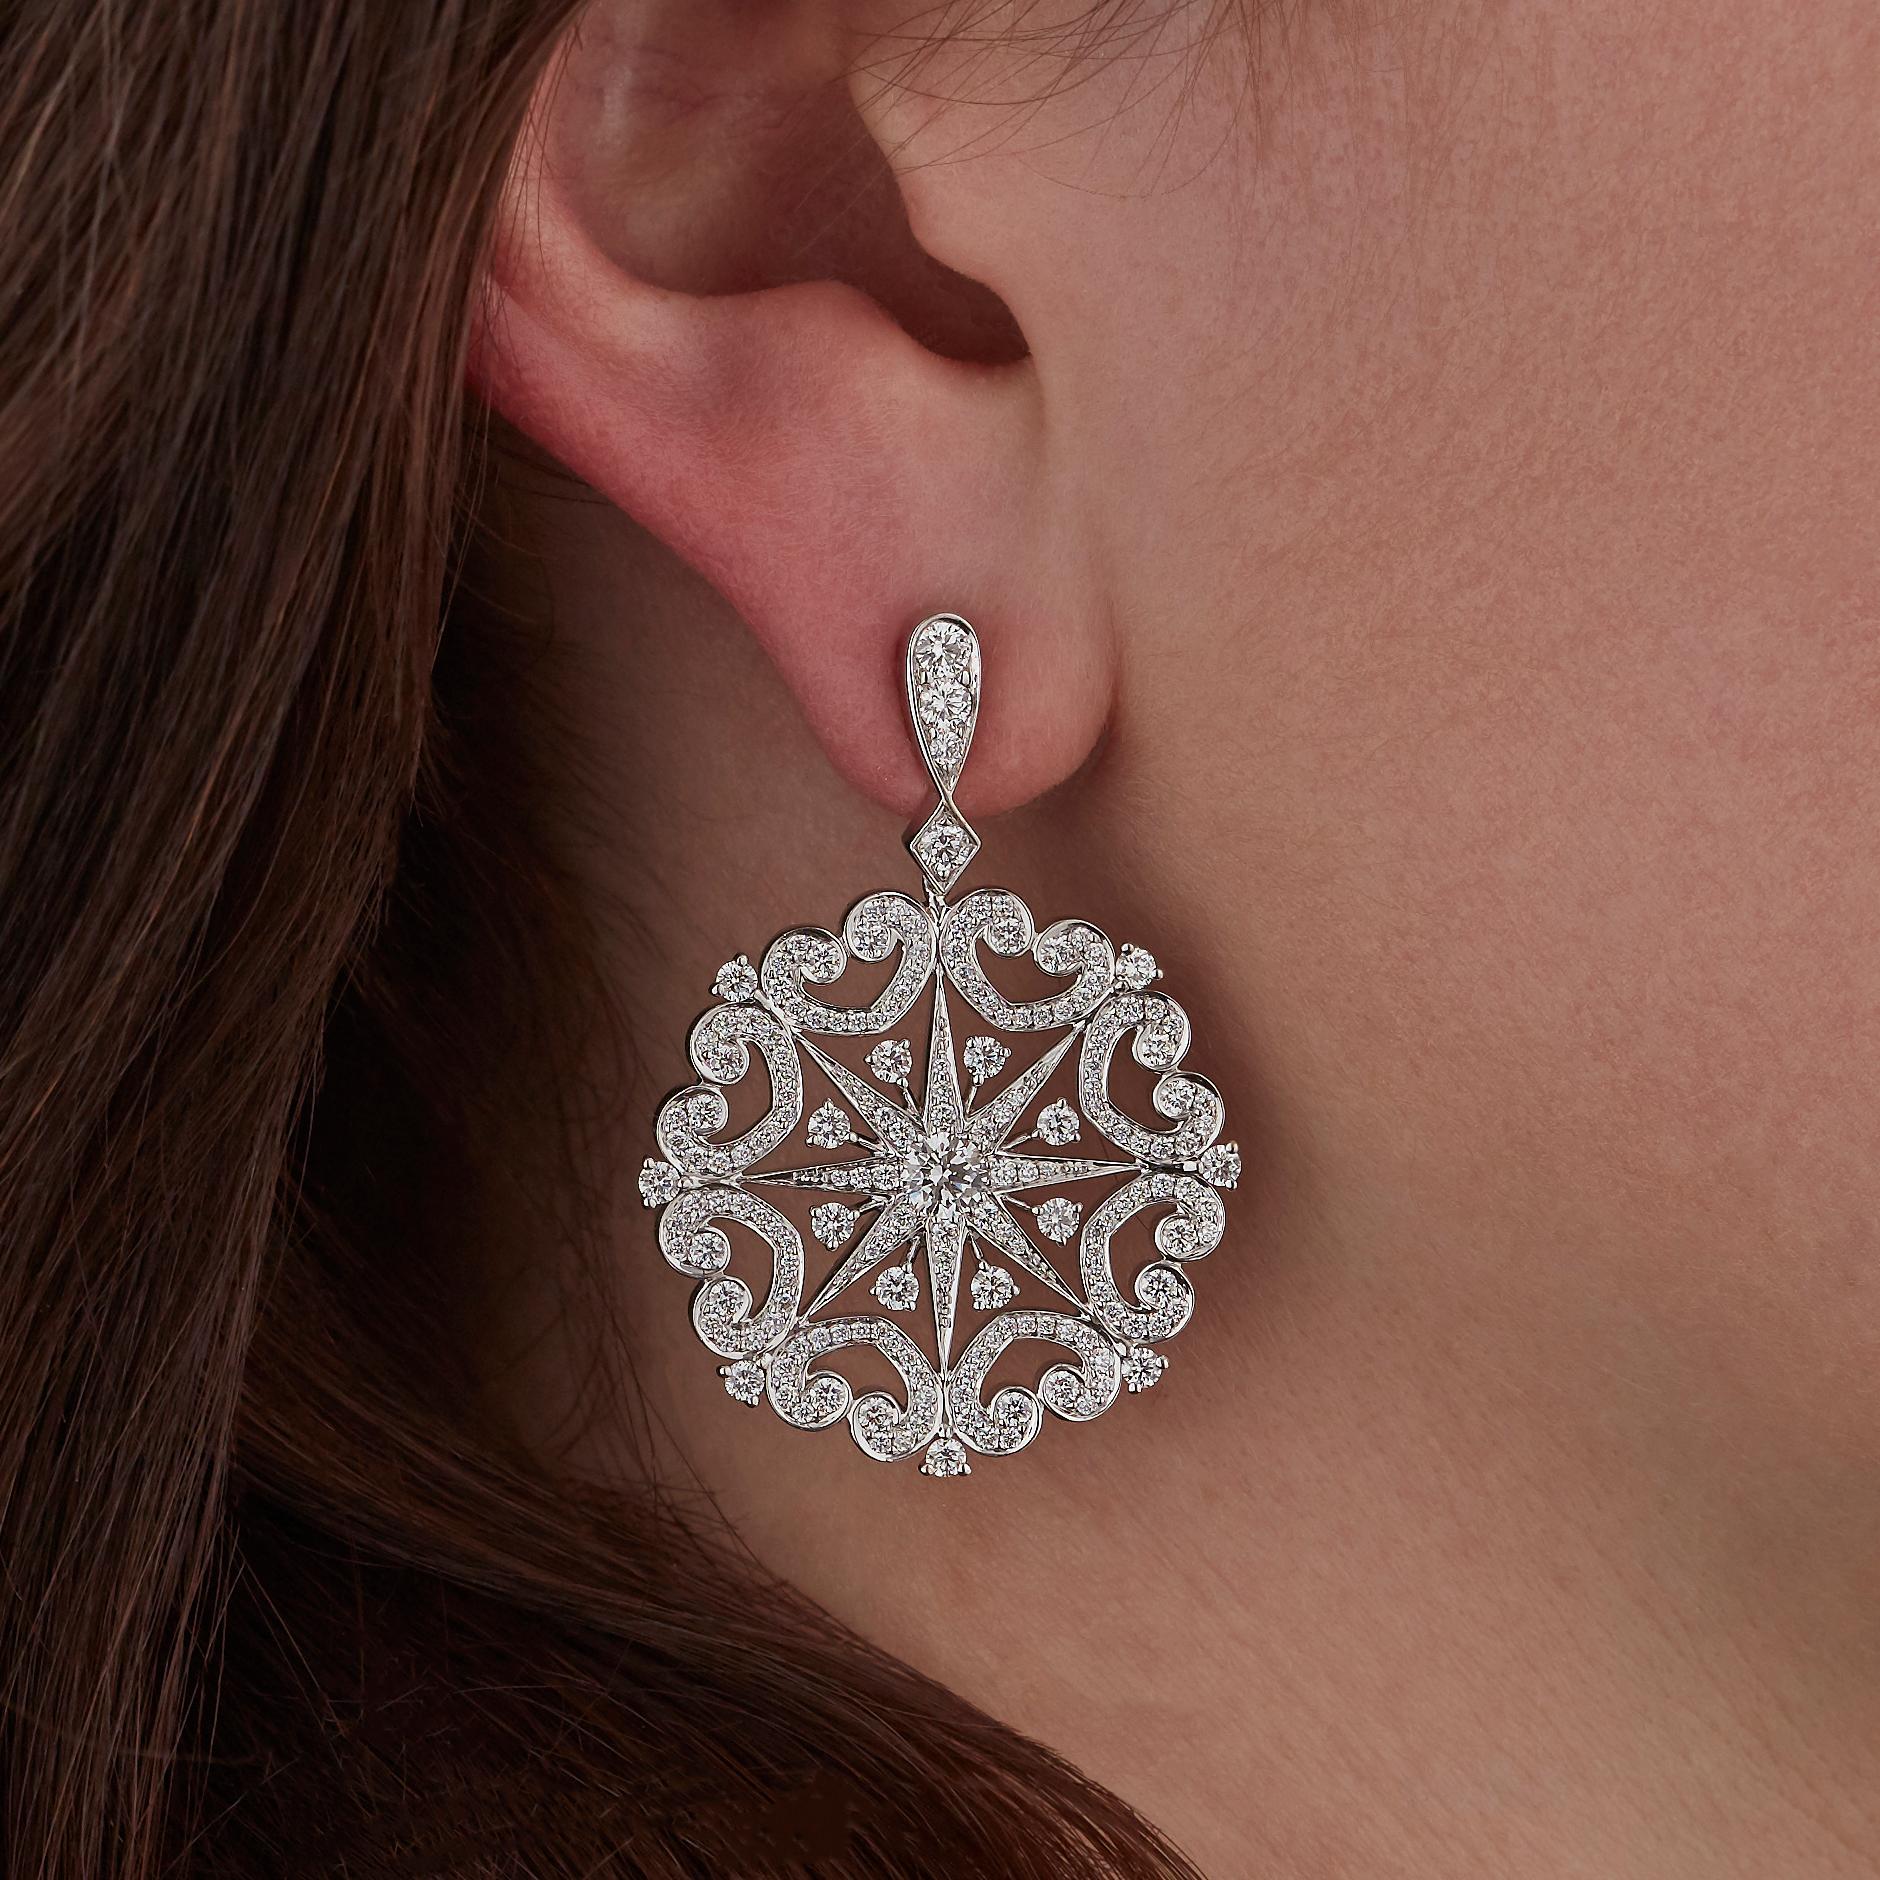 A House of Garrard pair of 18 krat white gold 'Starlight' drop earrings from the 'Muse' collection, set with round white diamonds.

360 round white diamonds weighing 3.31ct
Total diamond weight: 3.31ct

Established in 1735, the House of Garrard is